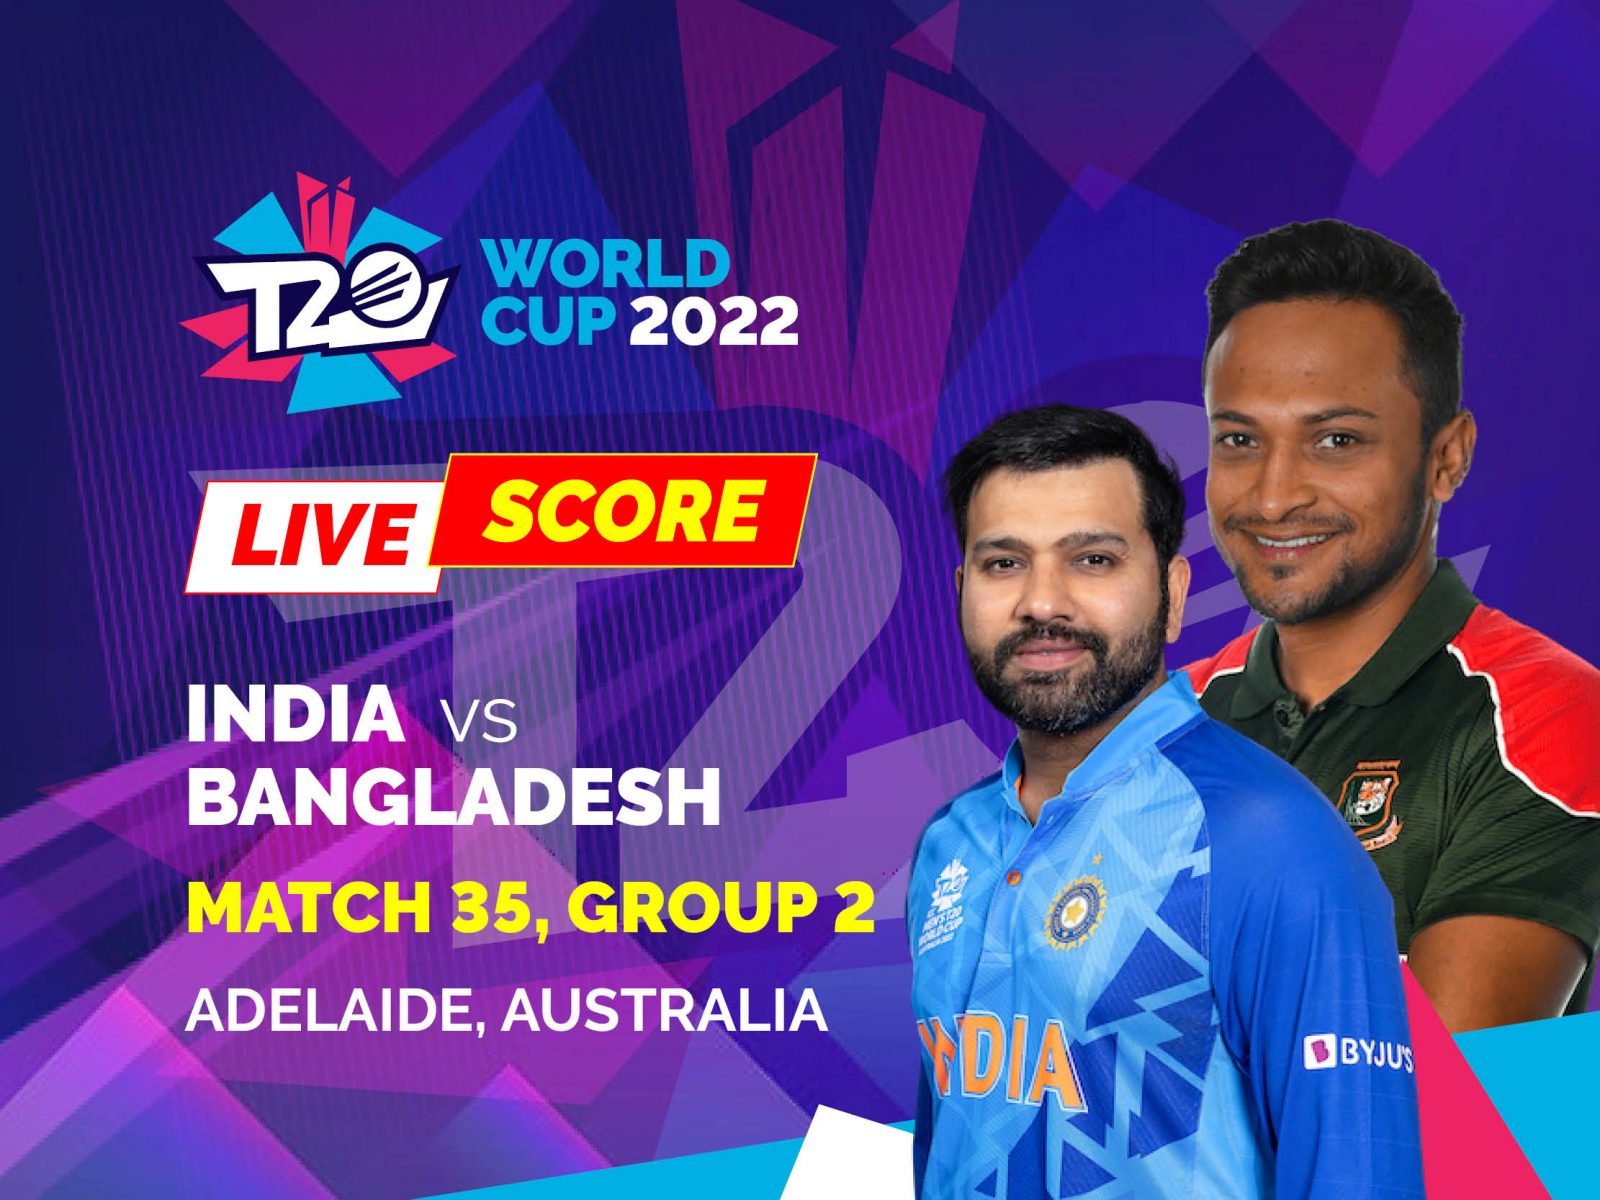 asia cup 2022 live video streaming